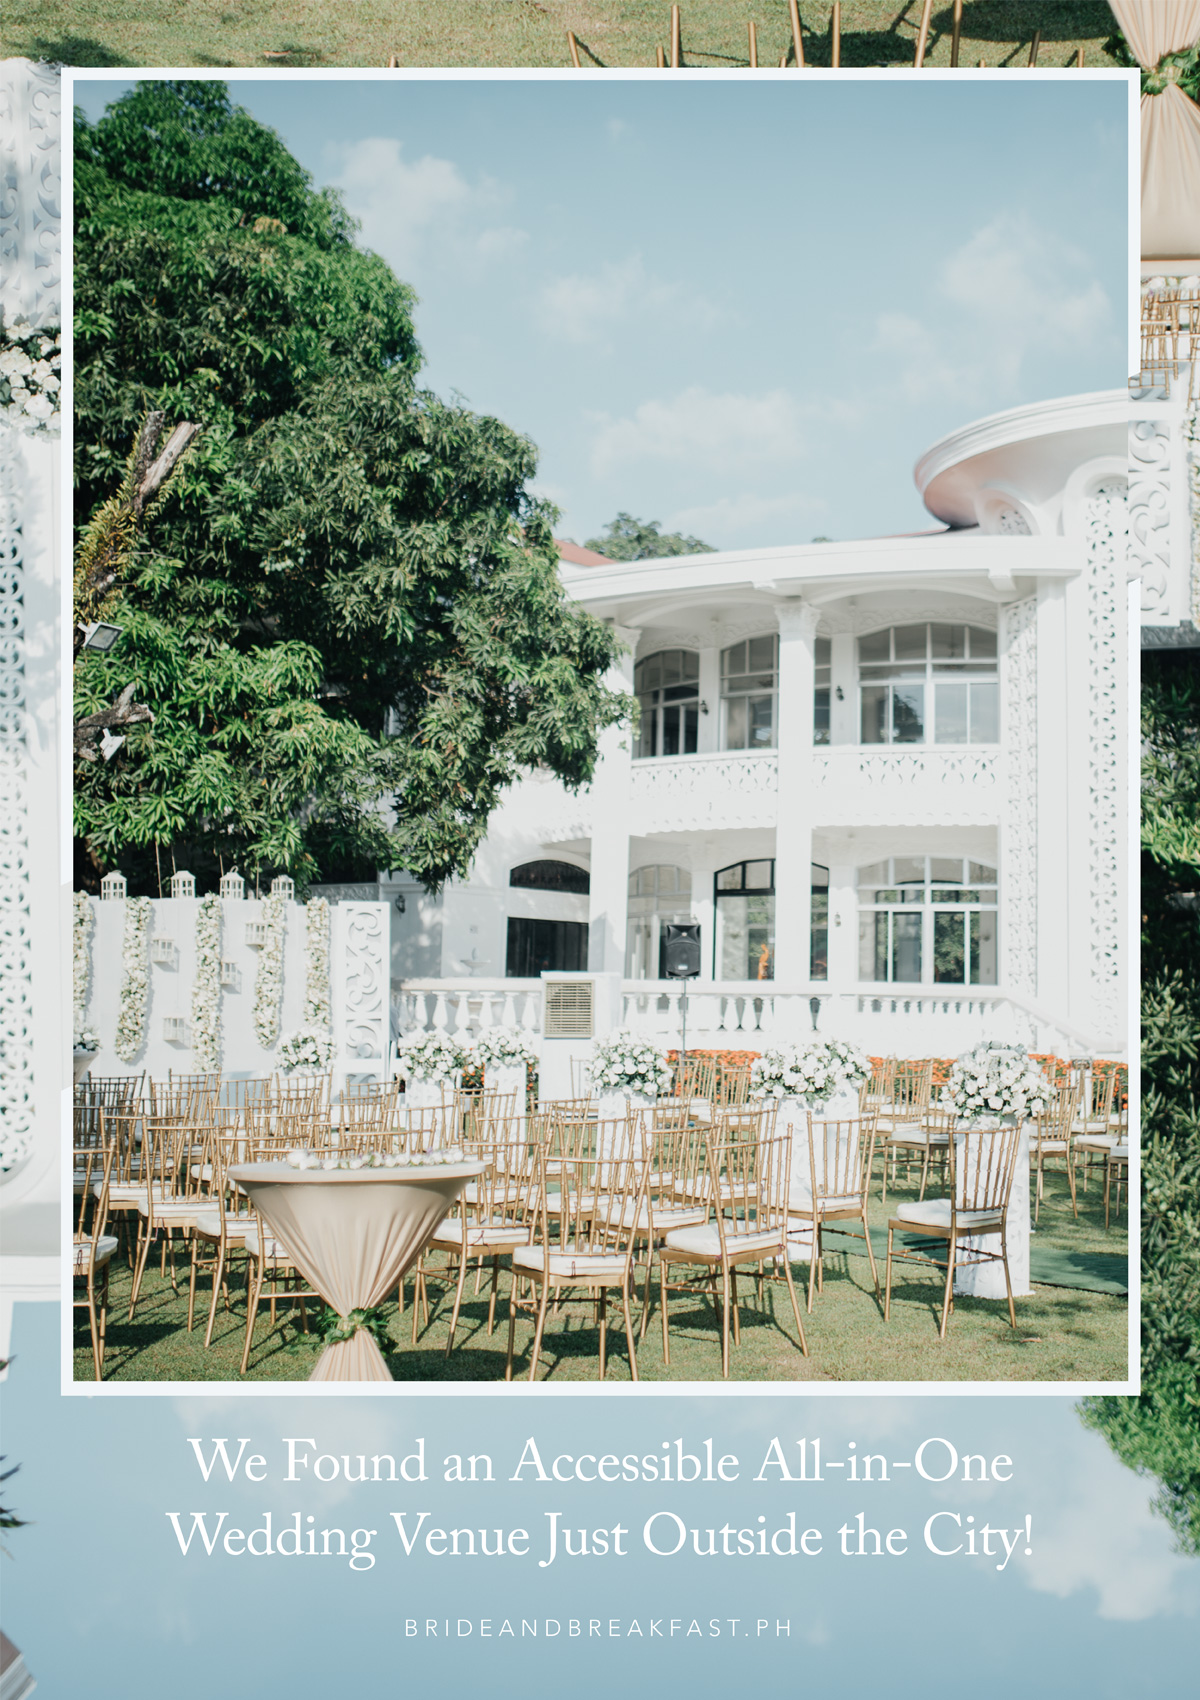 We Found an Accessible All-in-One Wedding Venue Just Outside the City!